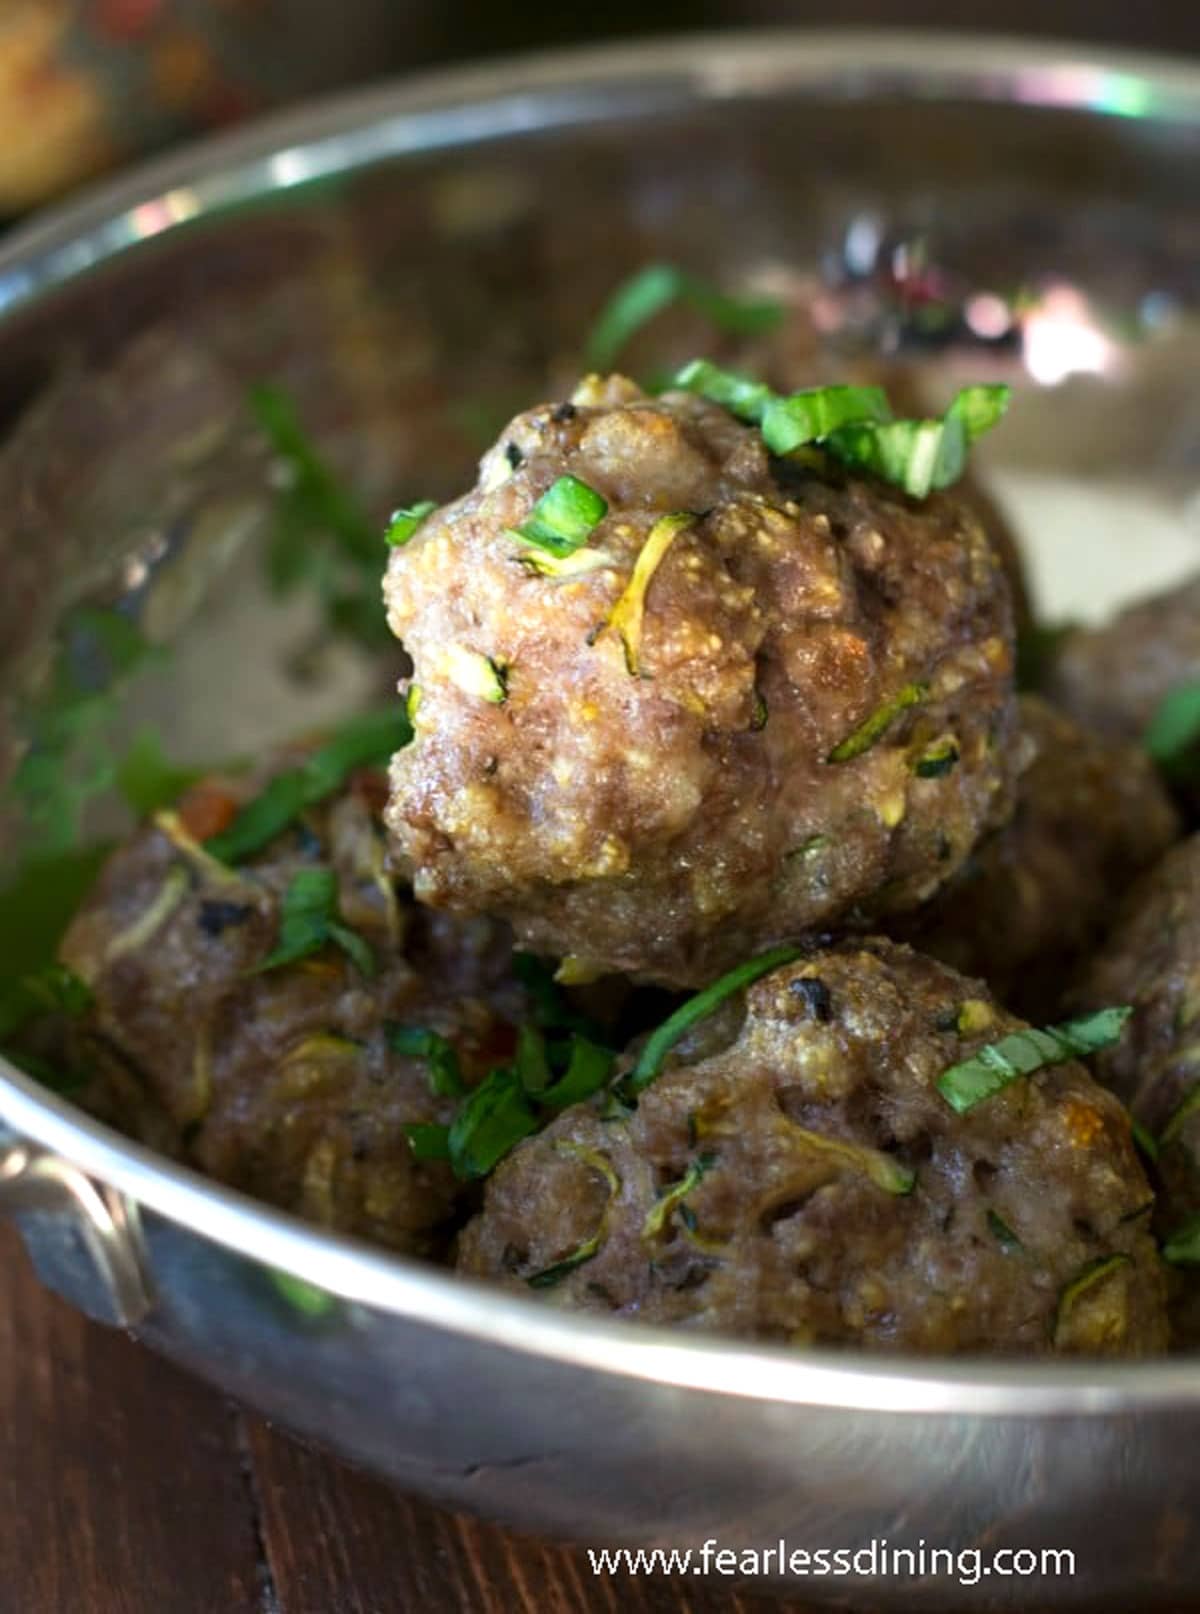 Cooked meatballs in a silver bowl.